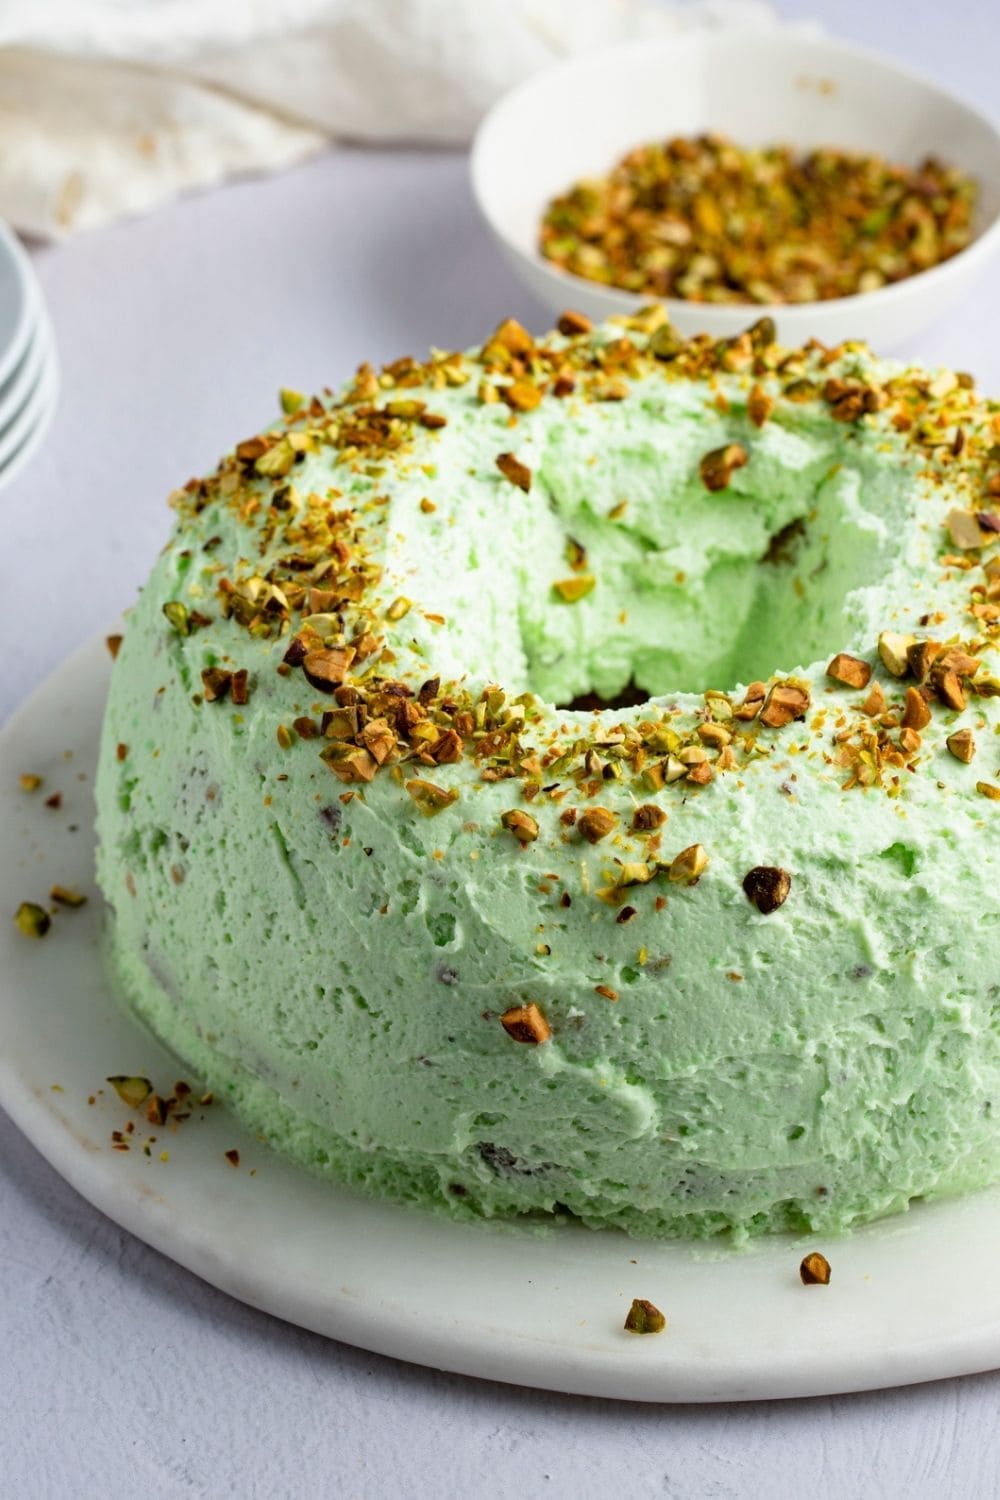 Homemade Pistachio Cake with Pistachio Nut Toppings